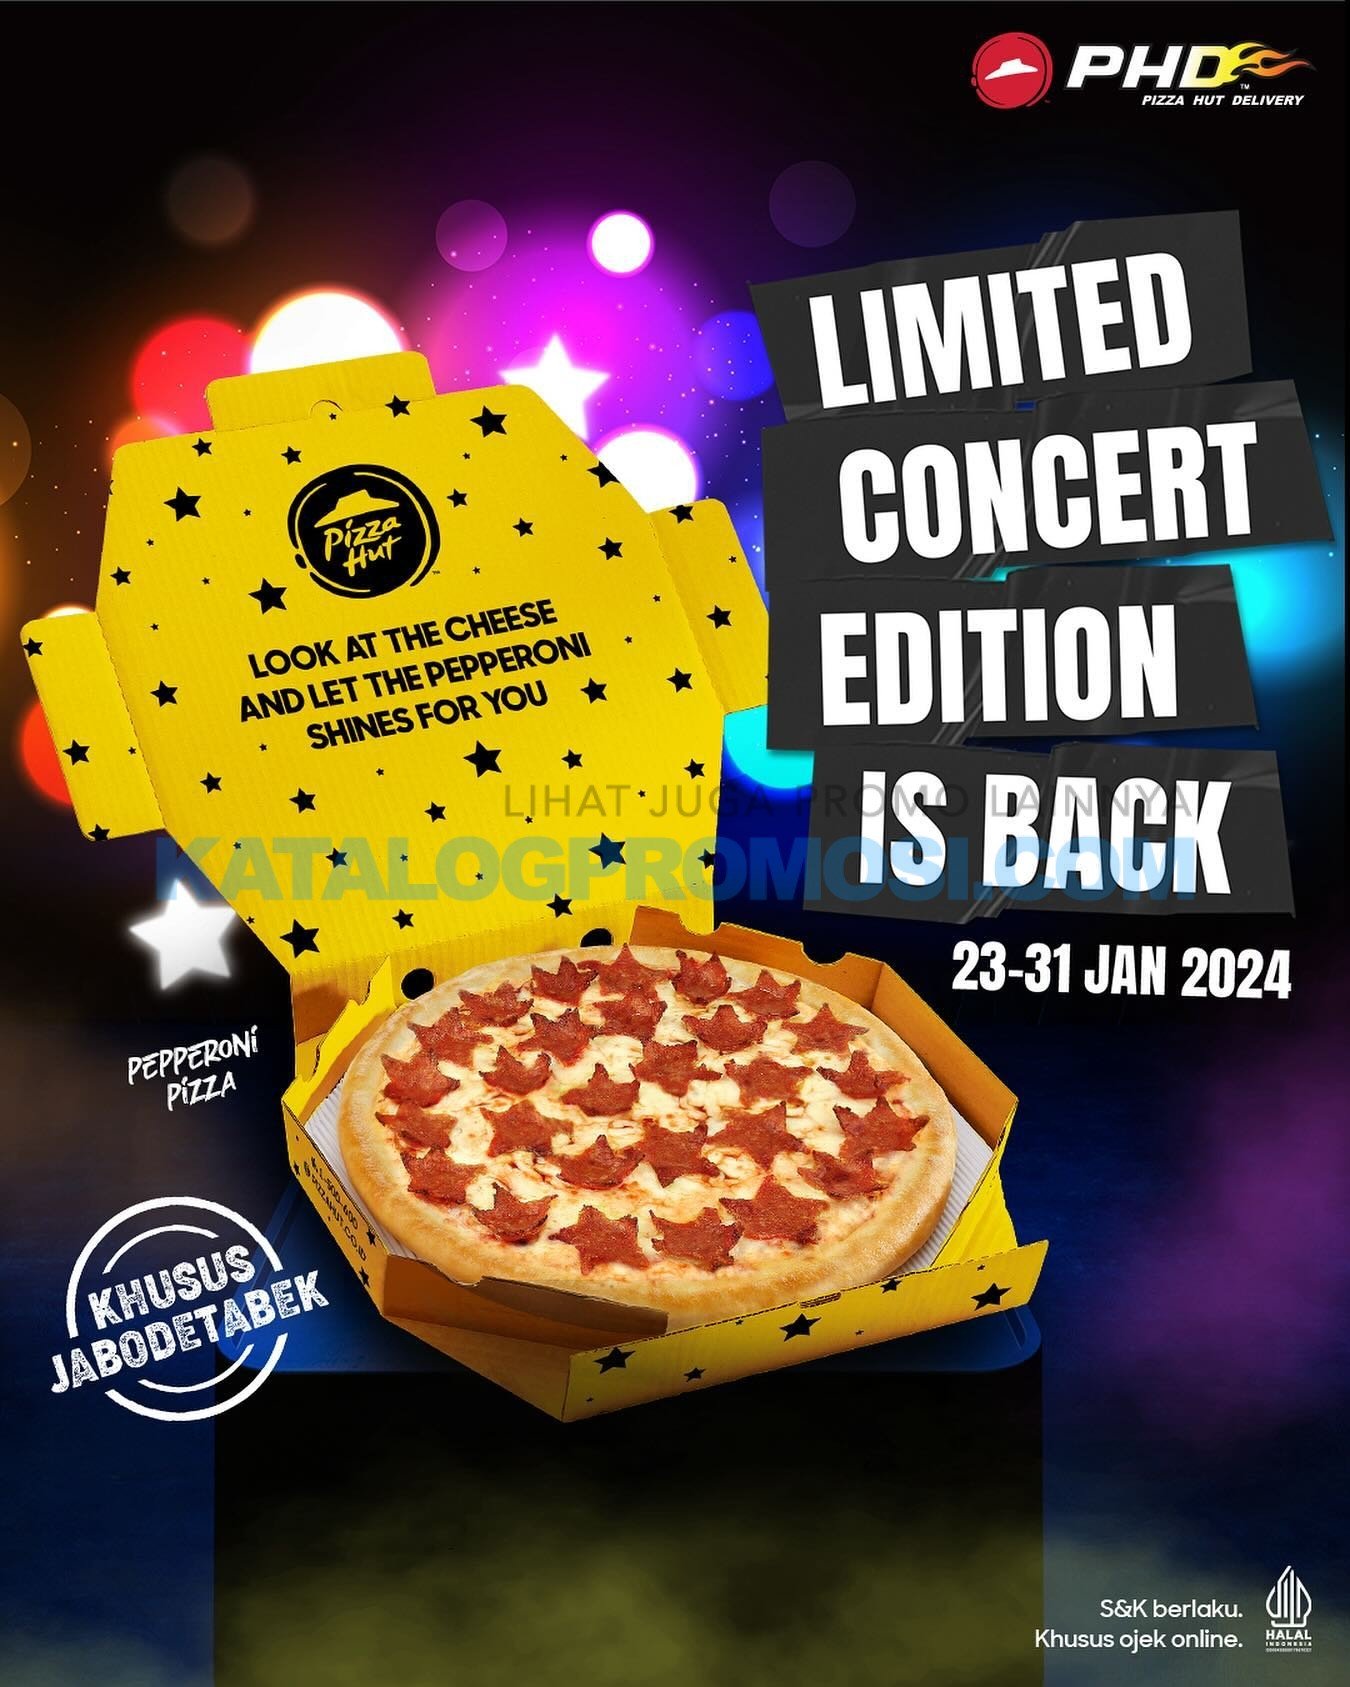 BARU! PHD Pepperoni Pizza Limited Concert Edition